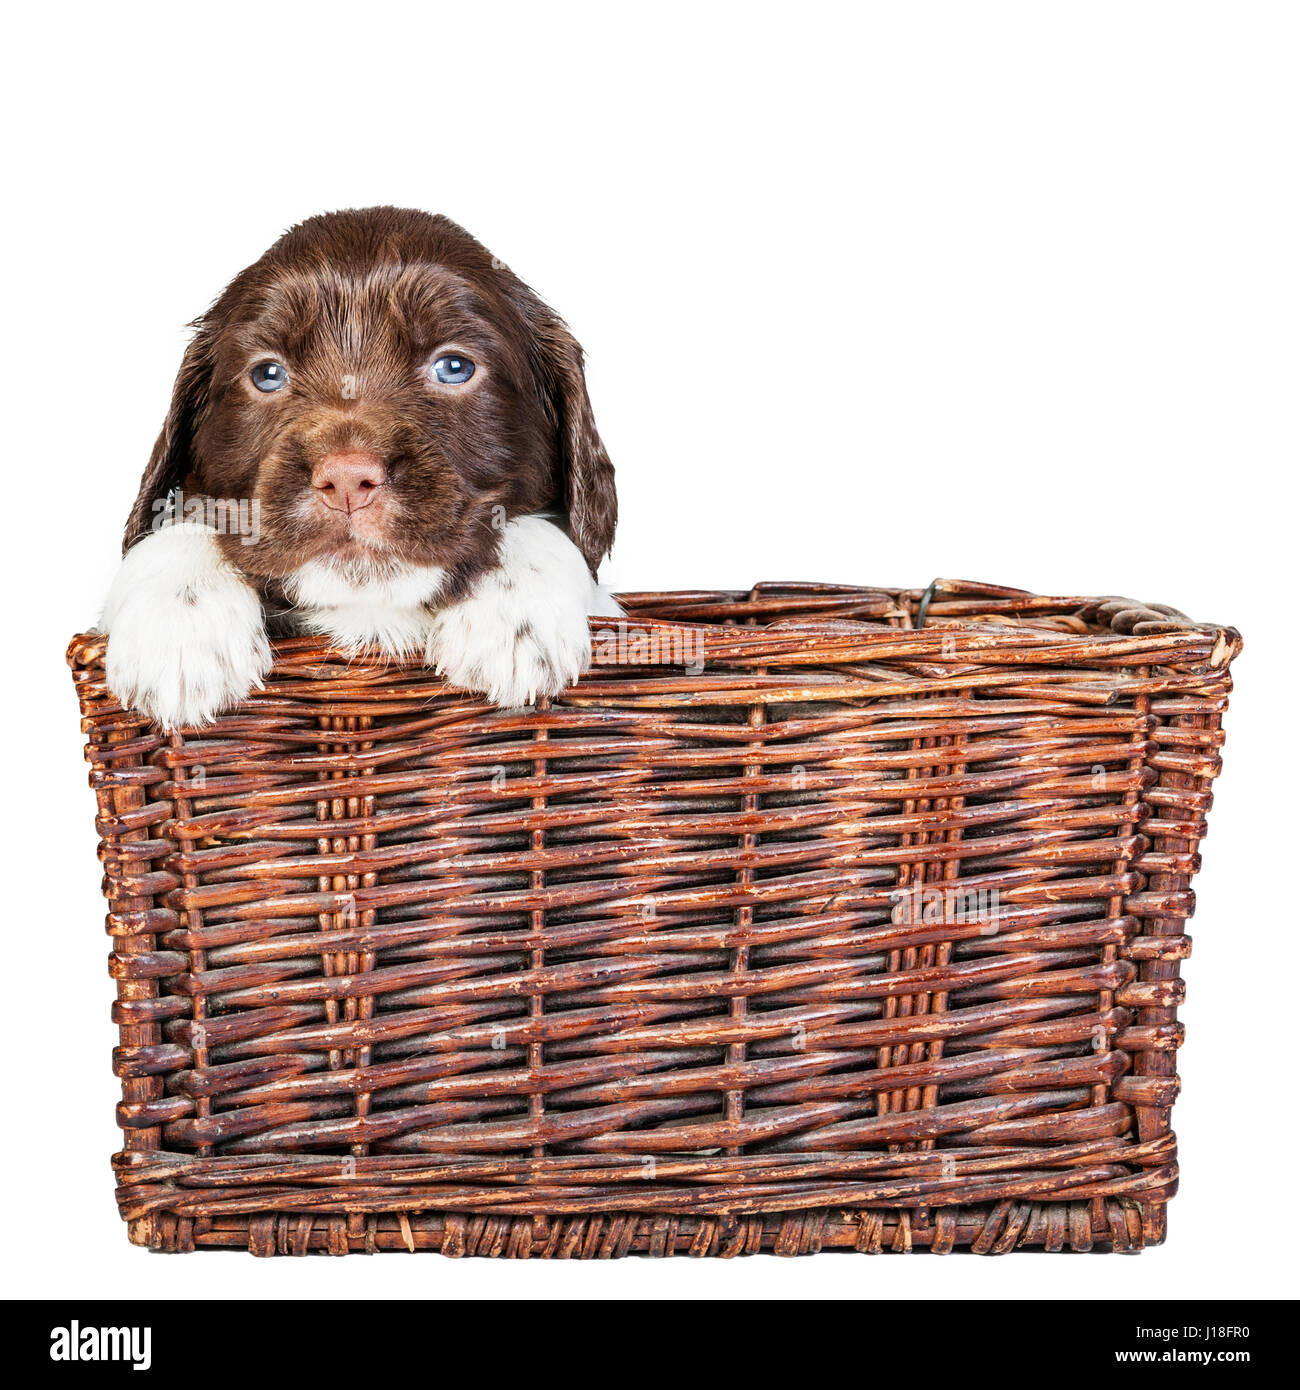 A 4 week old liver and white English Springer Spaniel puppy in a wicker basket Stock Photo